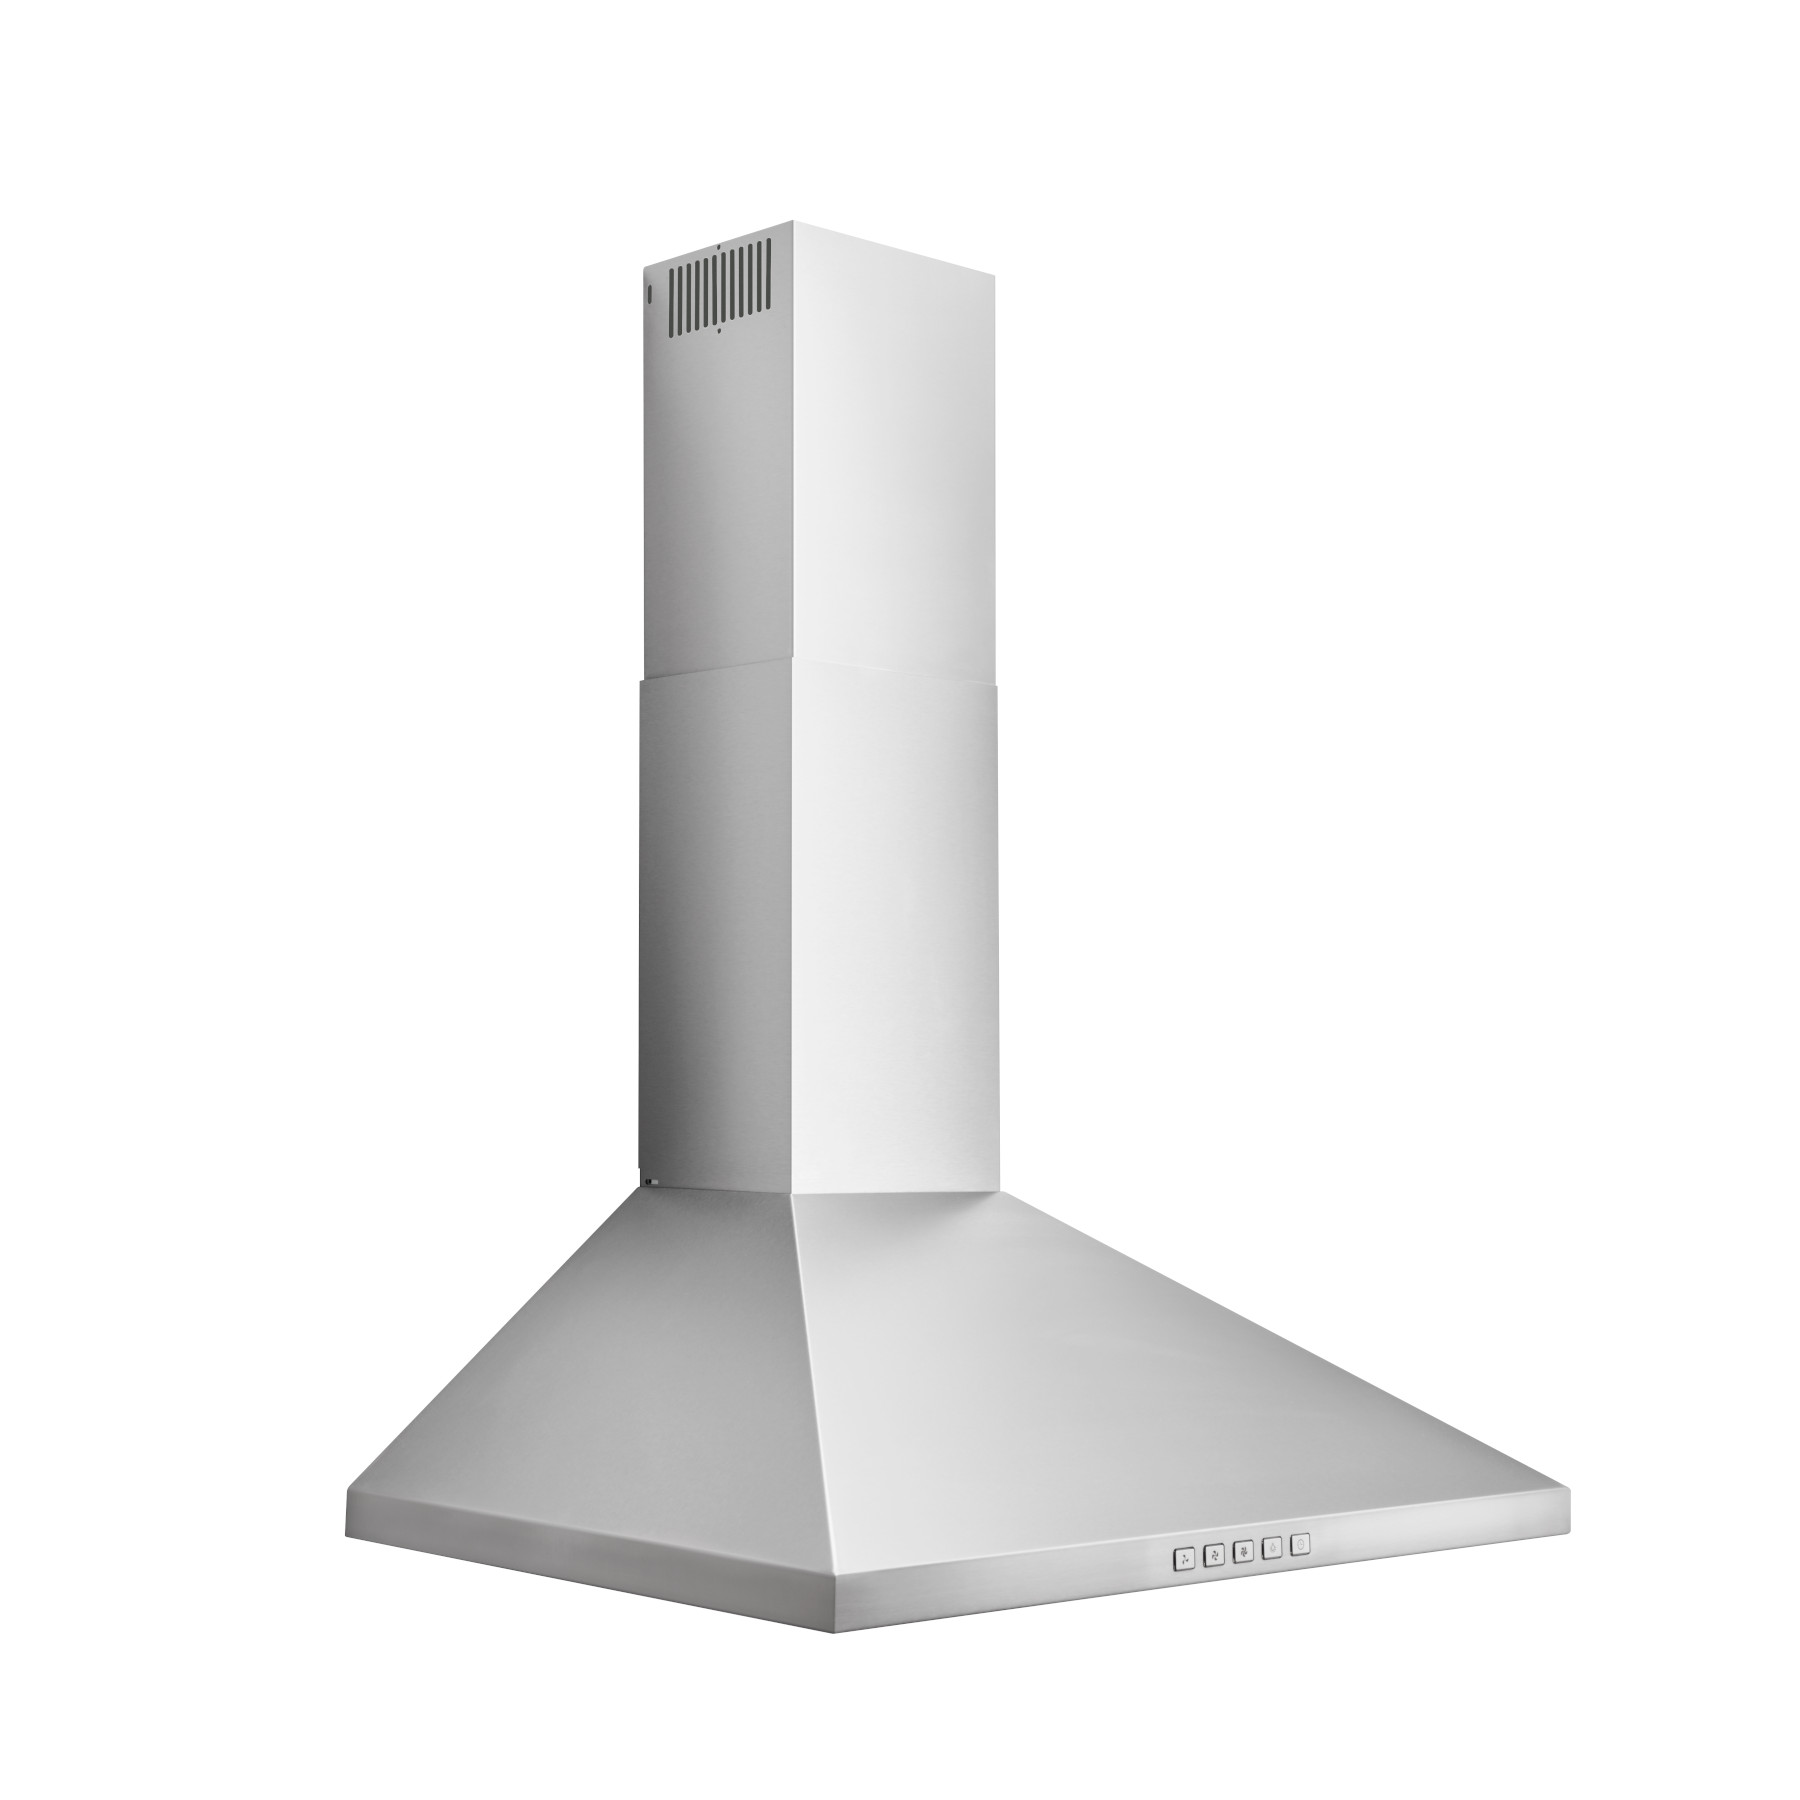 Wall Mount Range Hood Stainless Steel Convertible LED Light Exhaust Vent 30 in 